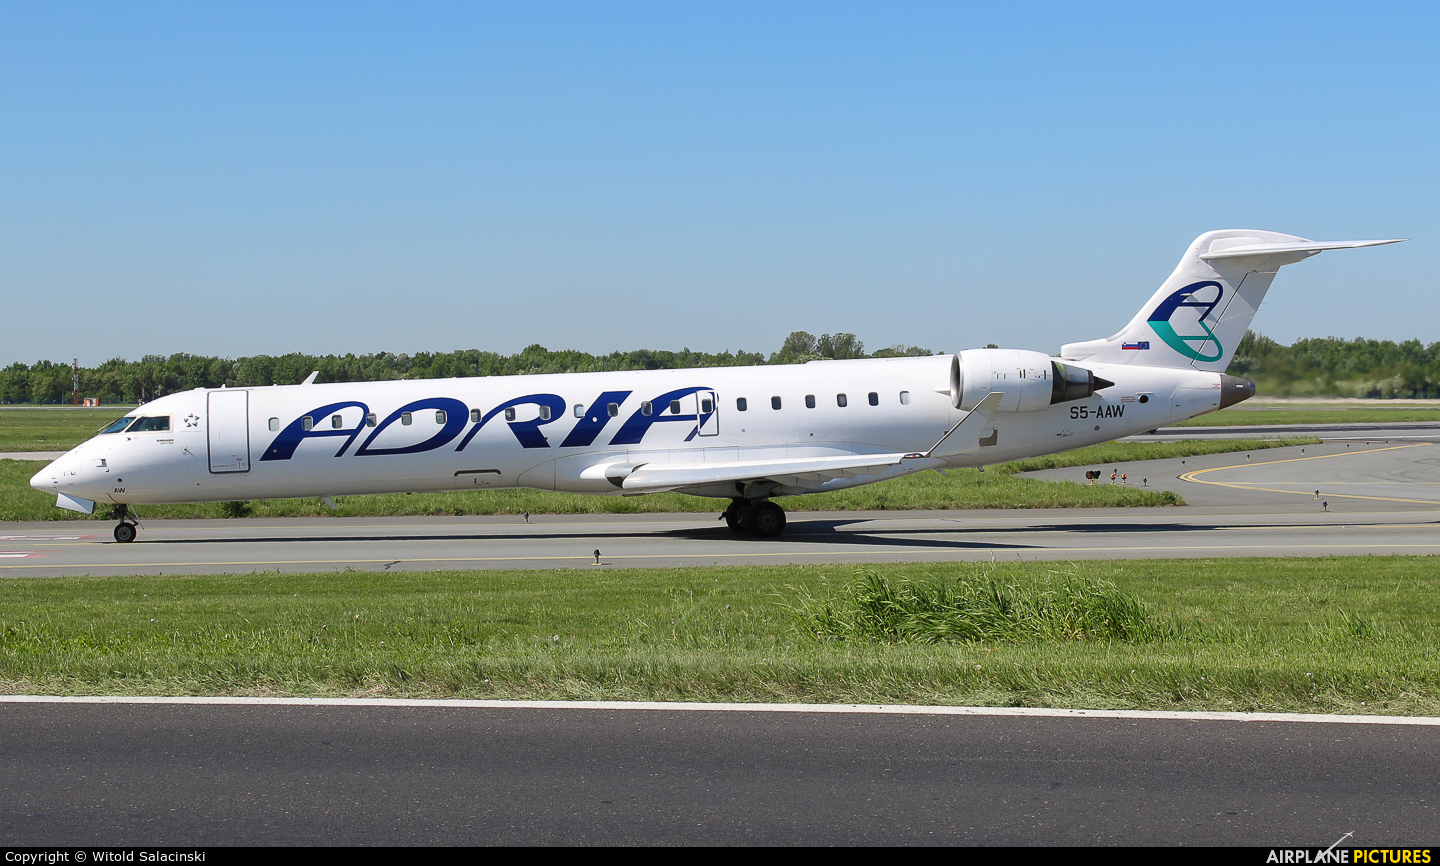 Adria Airways S5-AAW aircraft at Warsaw - Frederic Chopin